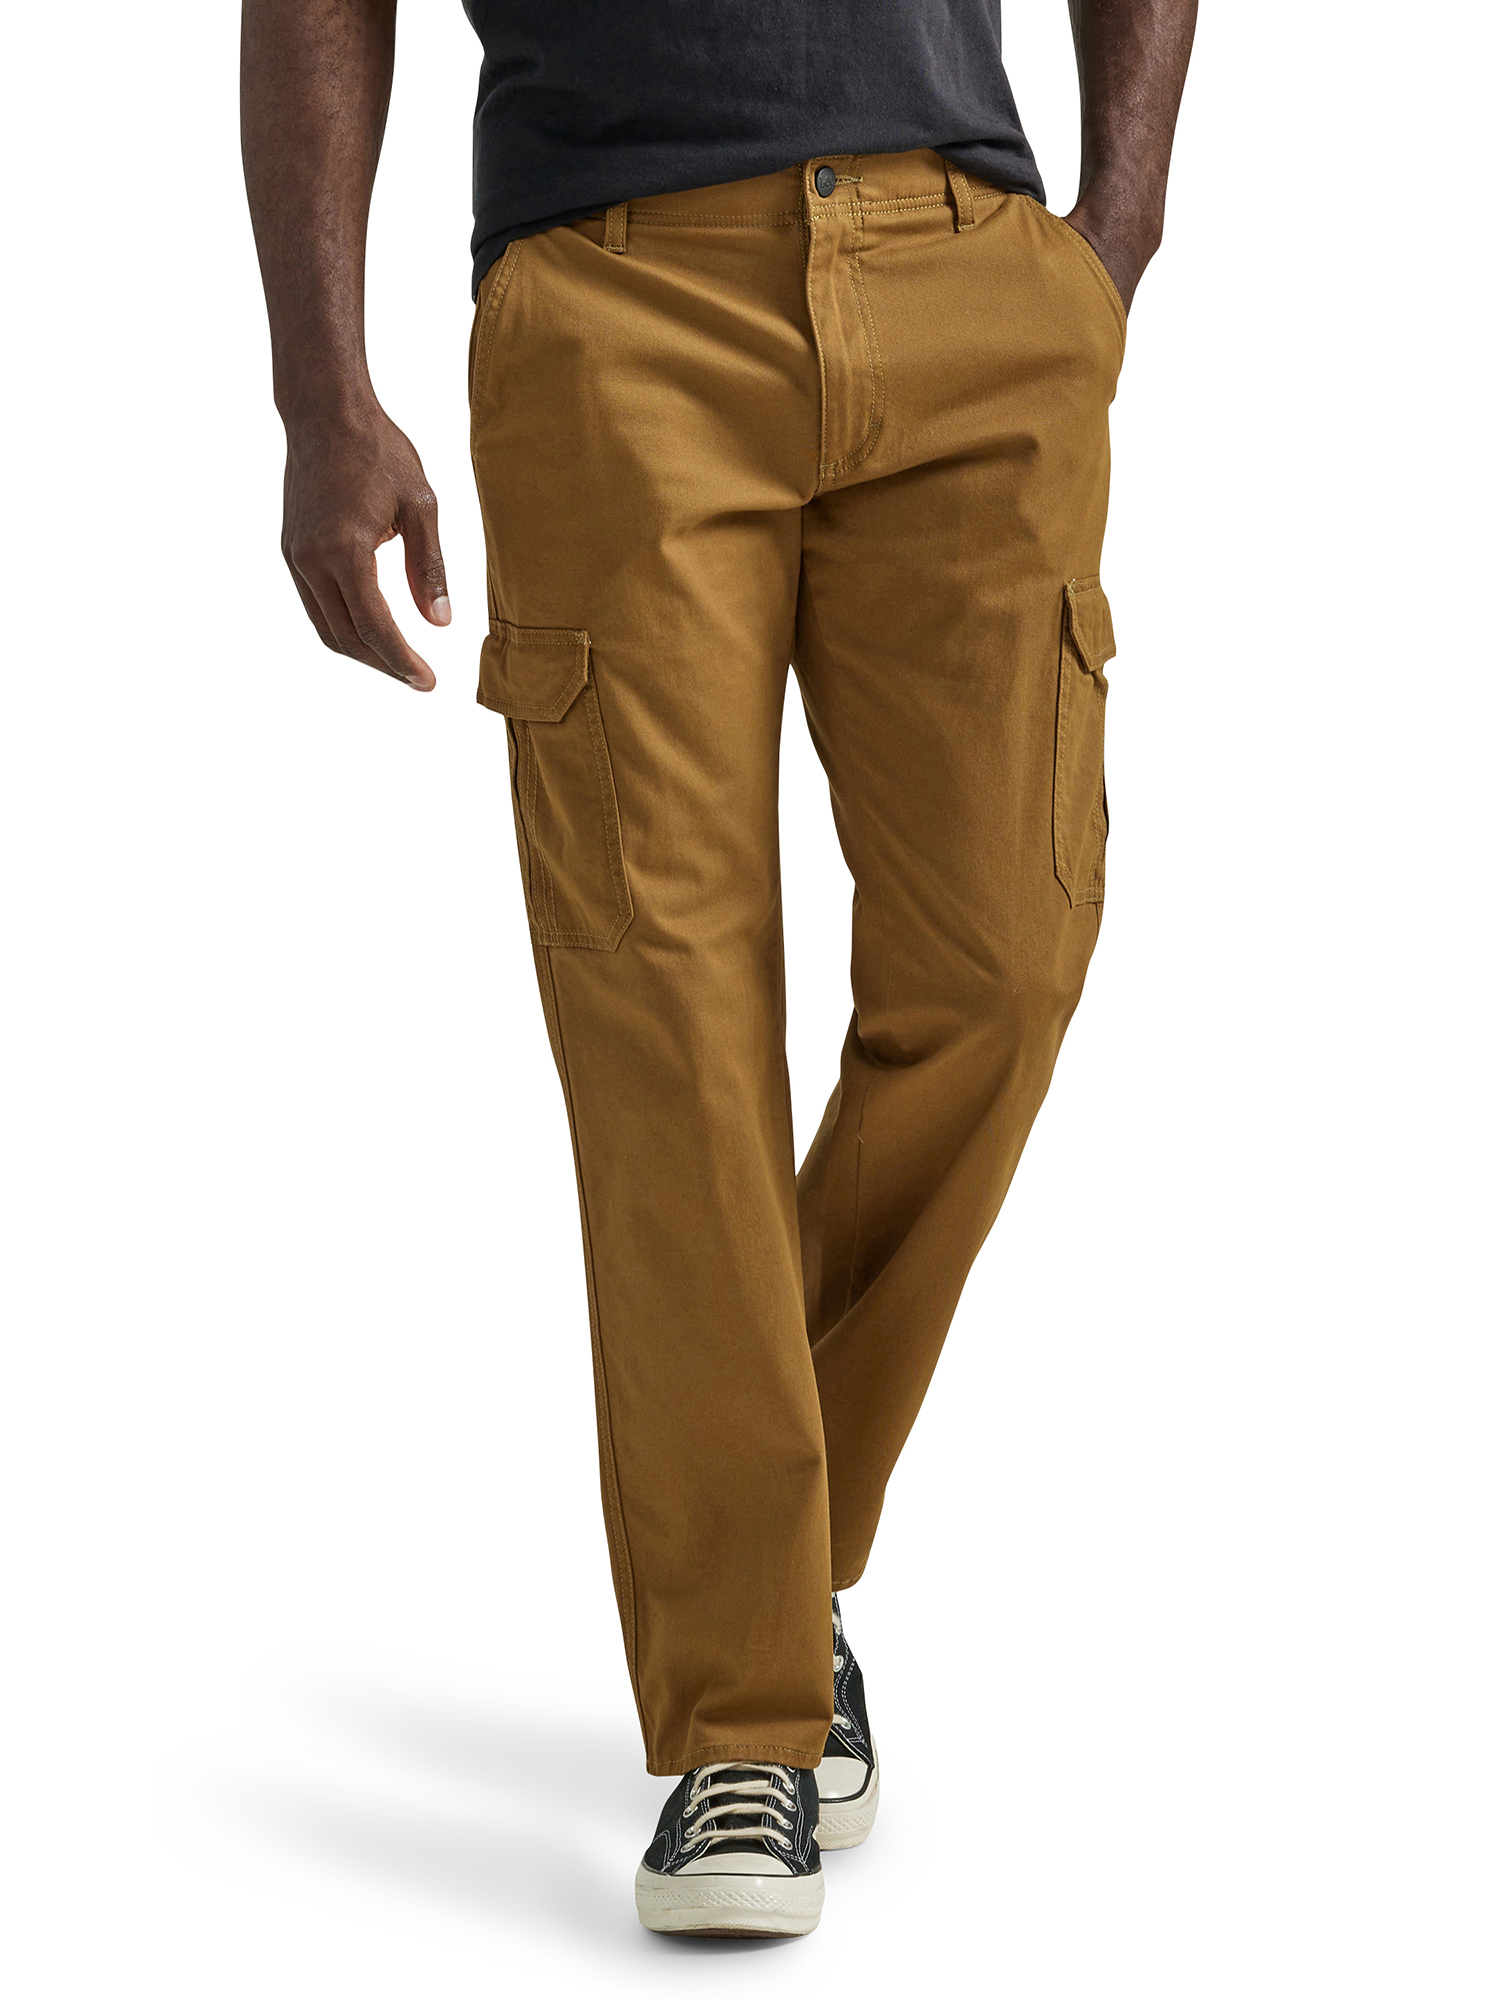 Lee Men's Extreme Comfort Cargo Twill Pant Straight Fit - Walmart.com